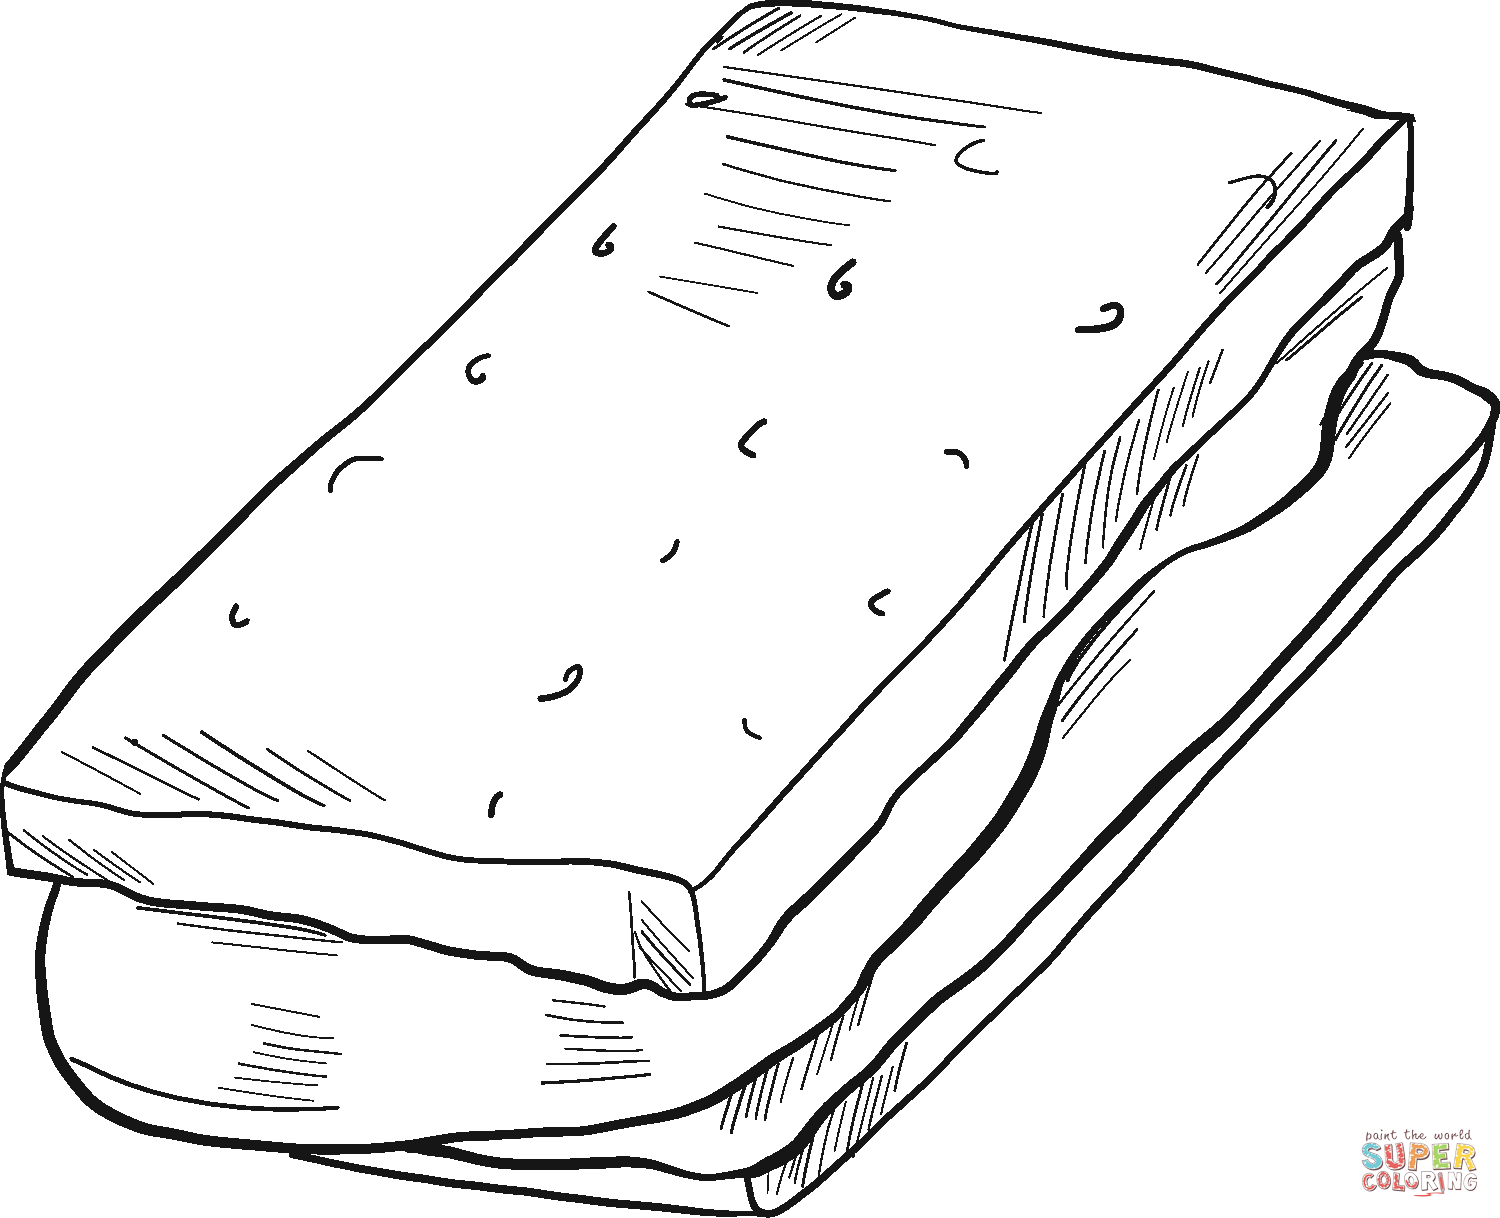 Smore coloring page free printable coloring pages